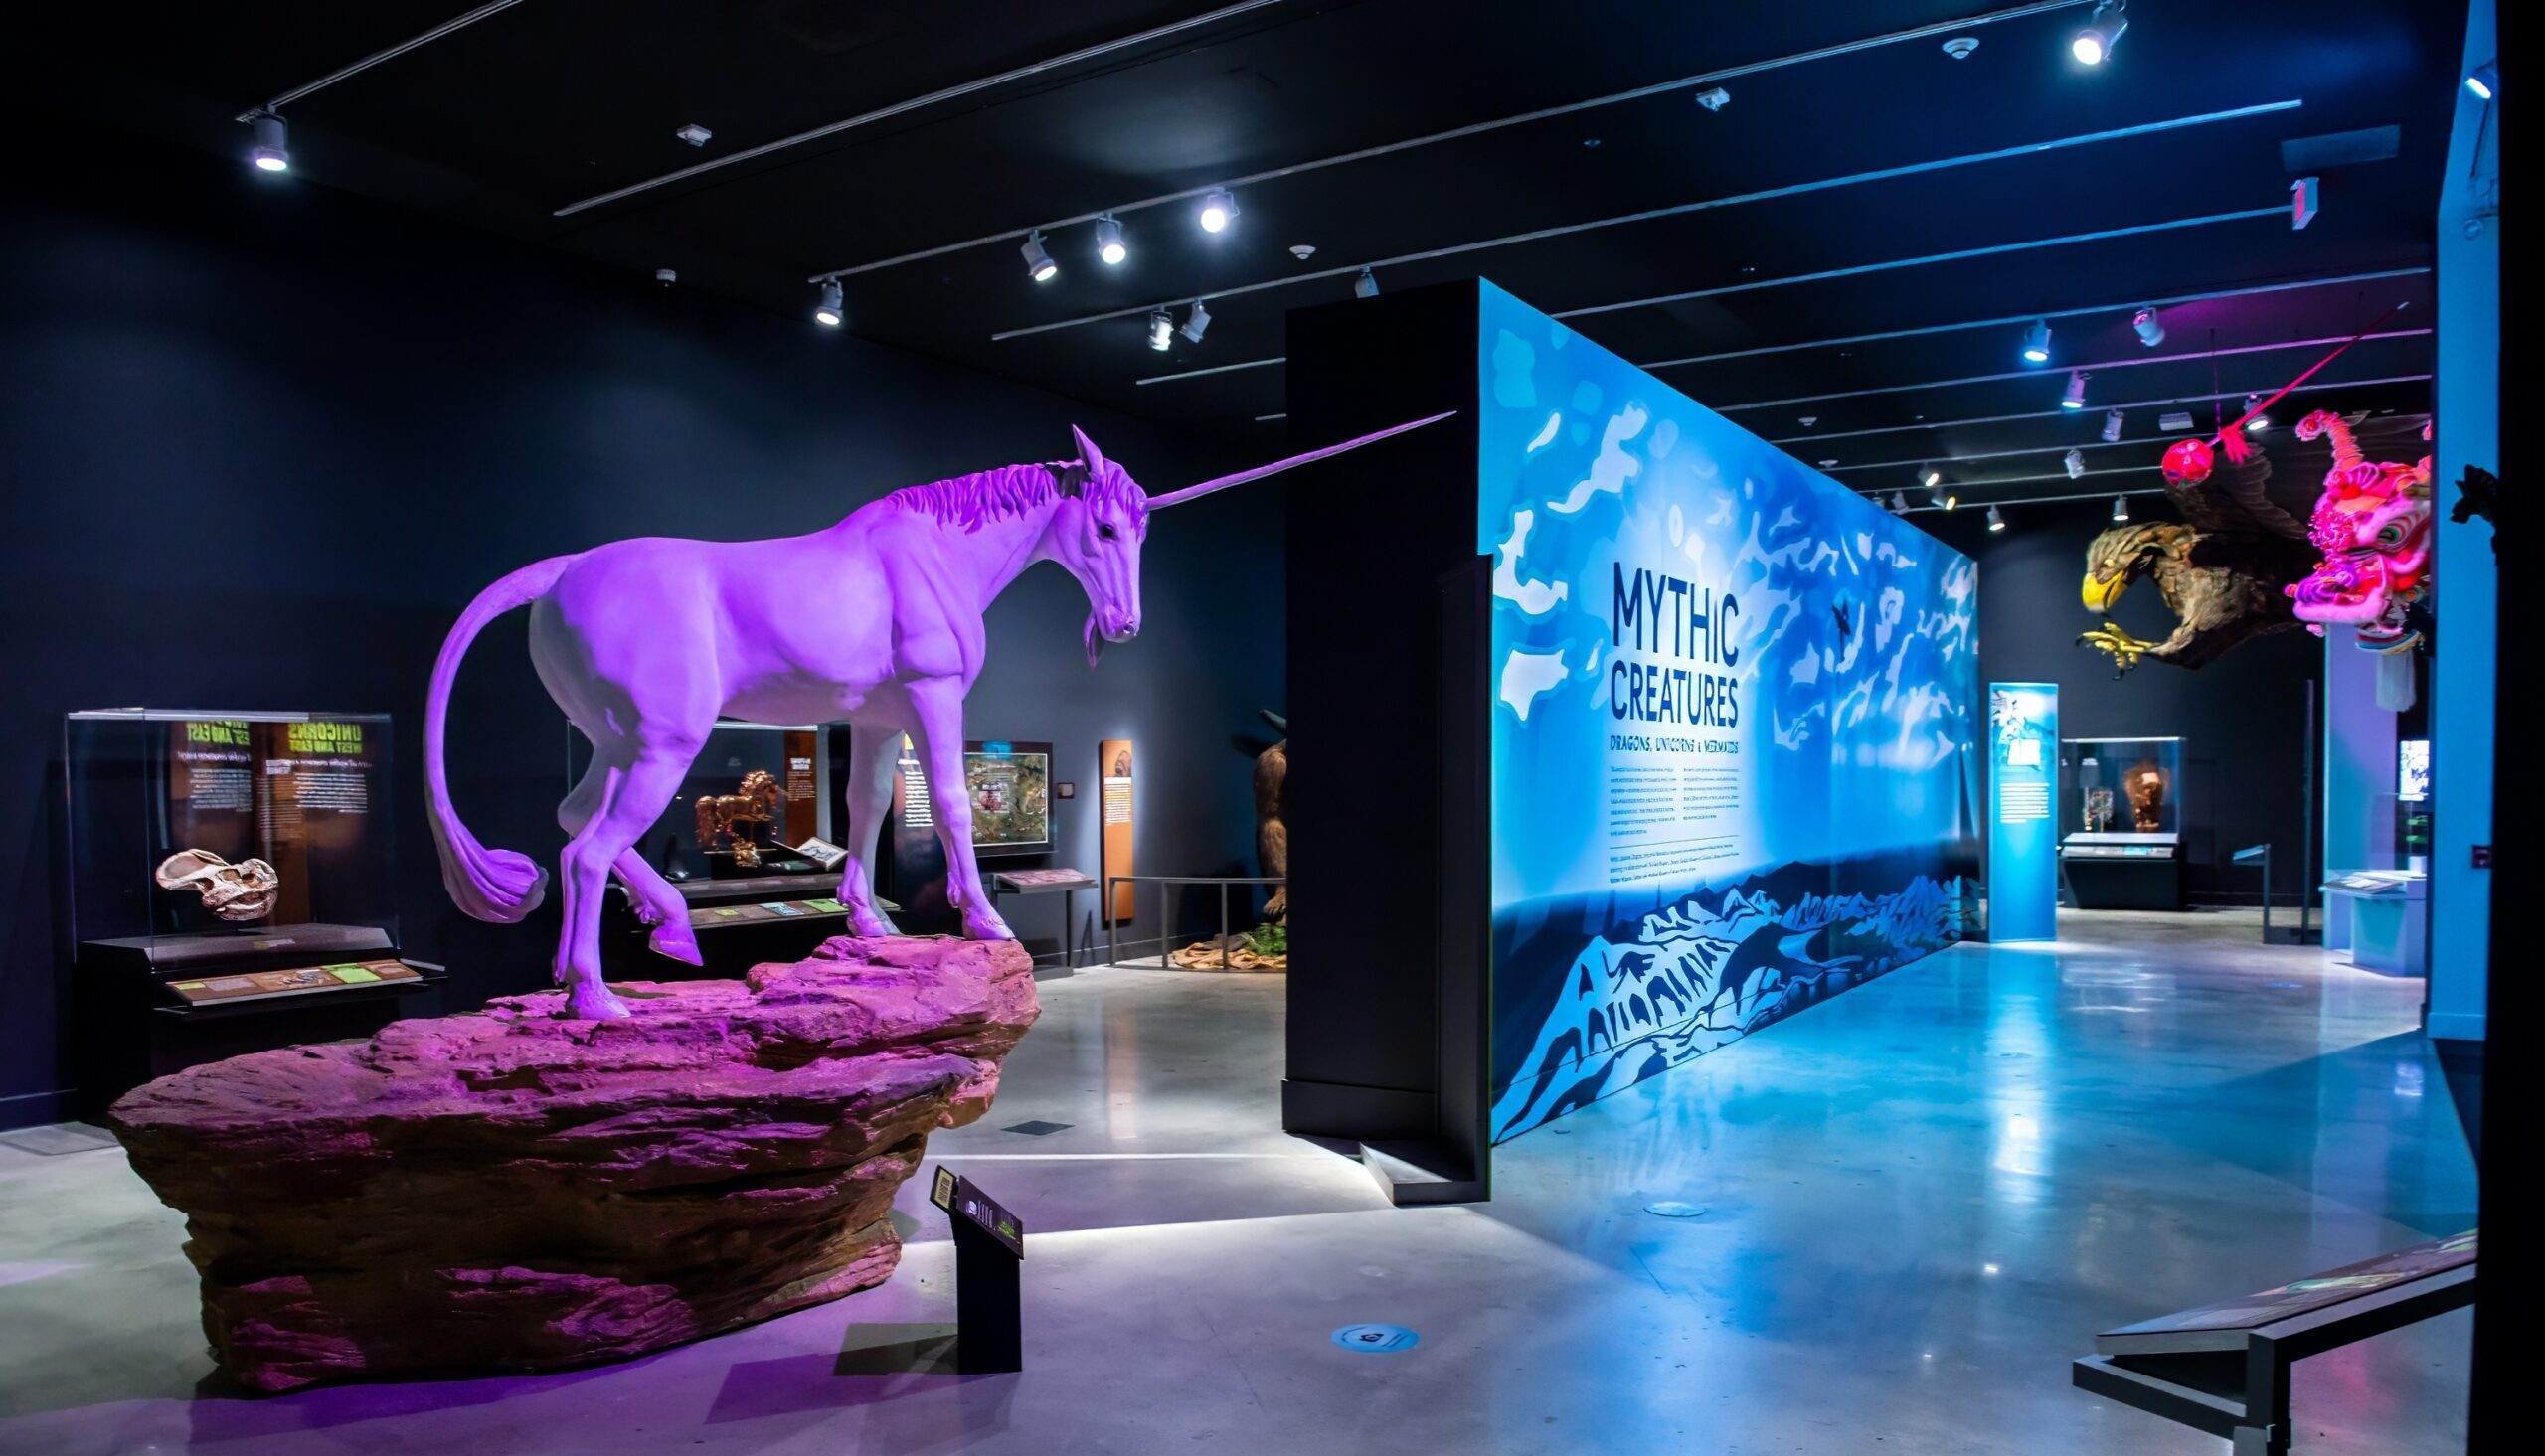 View of the Mythic Creatures exhibition; a unicorn sculpture stands atop a rock and is bathed in purple light. A blue and white entry panel with the text "Mythic Creatures" stands in the background.